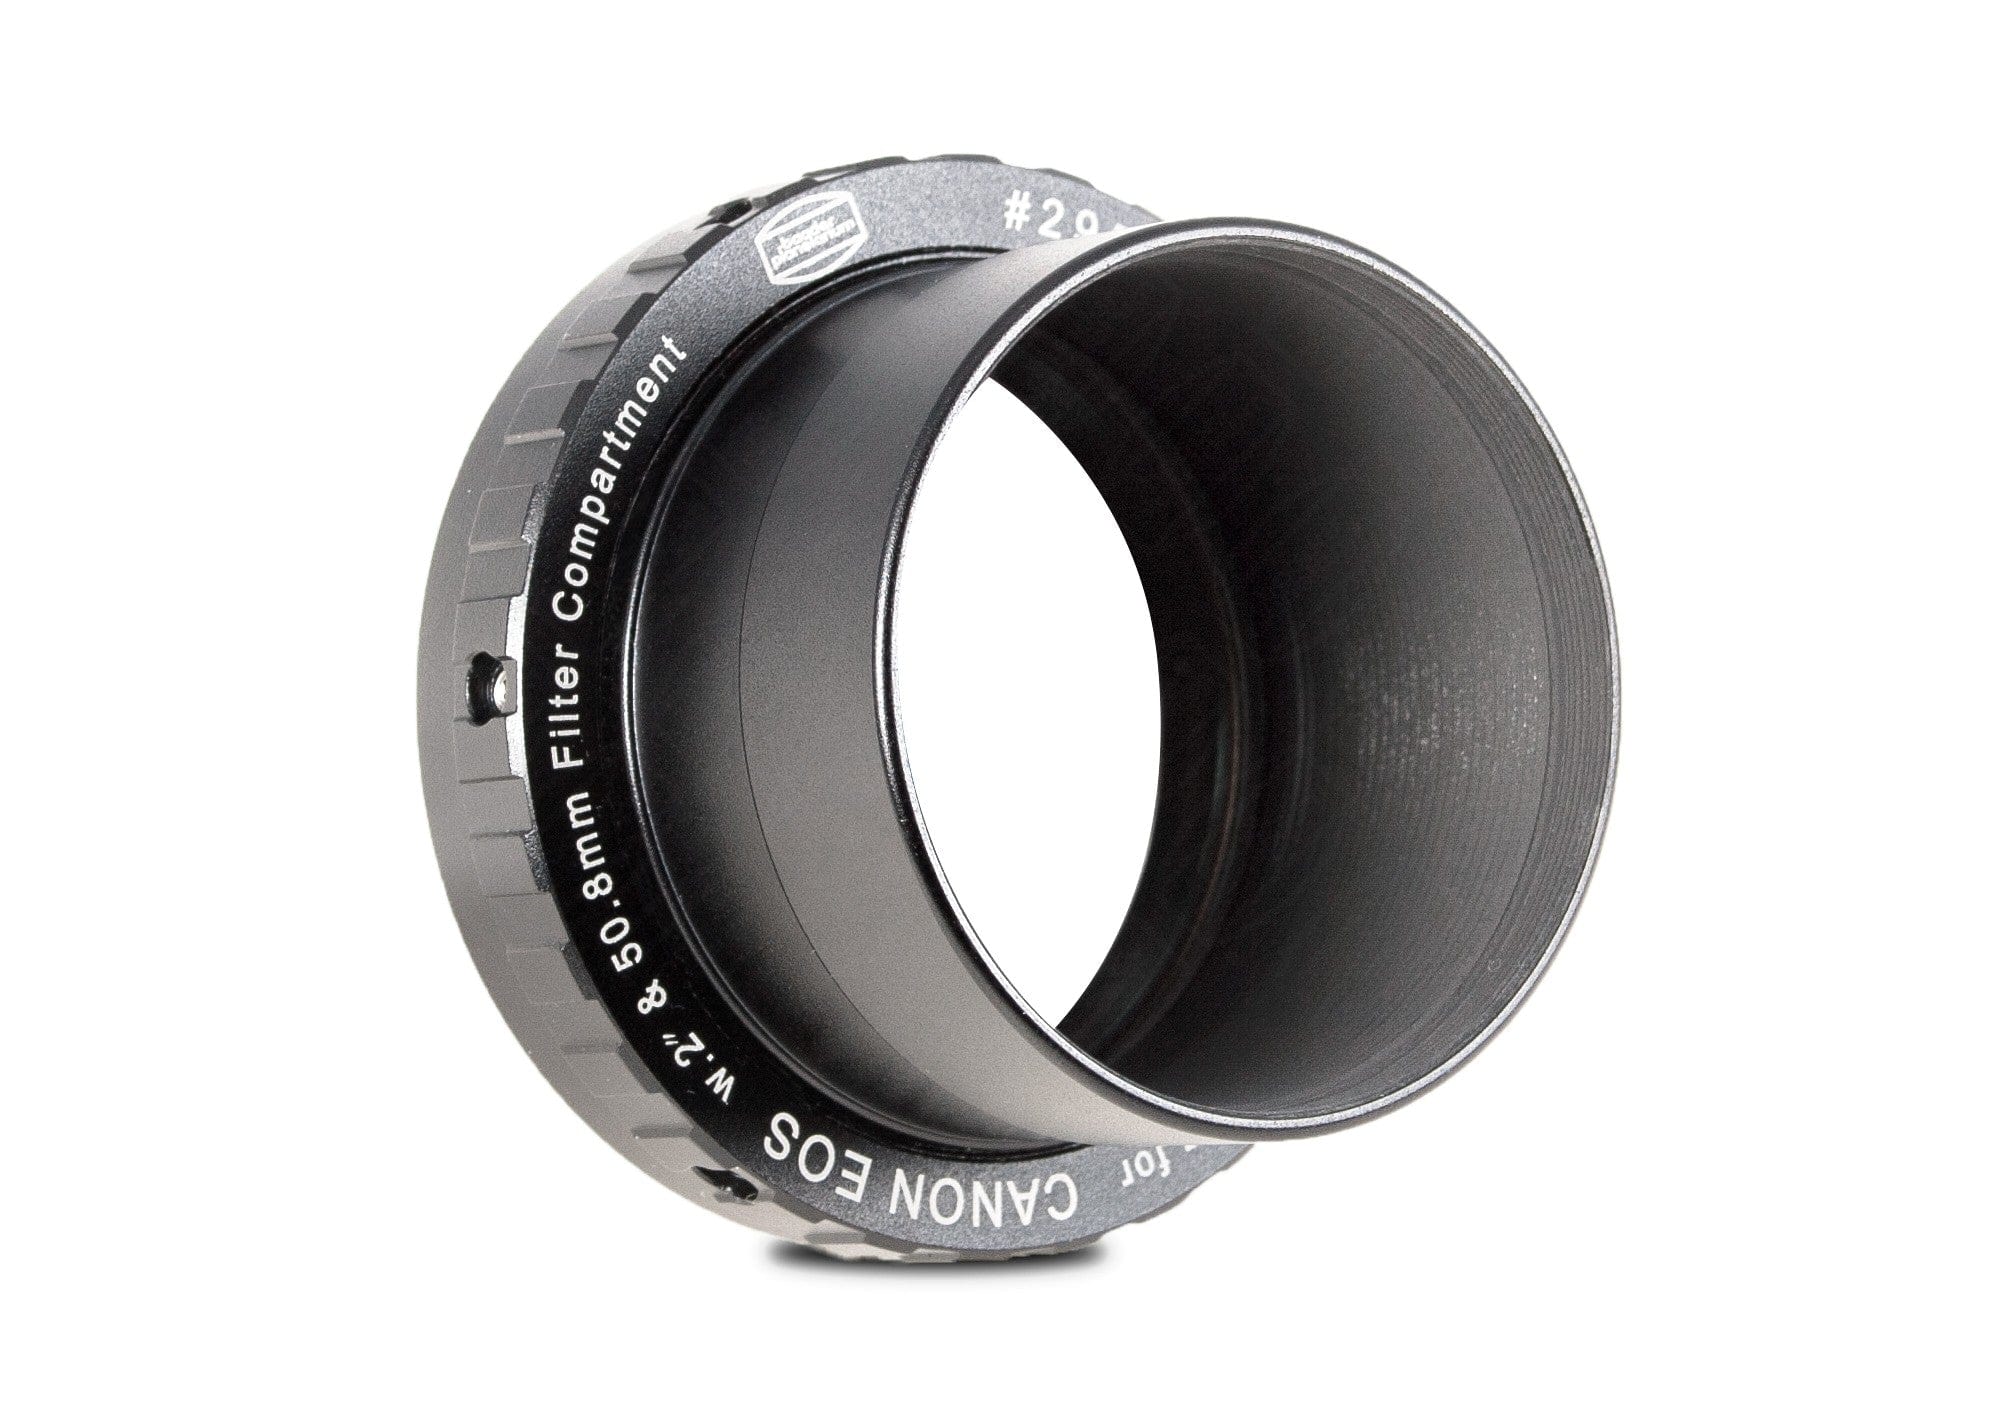 Baader Planetarium Accessory Baader Protective Wide T-Ring for Canon-EOS, Incl 2" Nose and Convertible Internal Filter Mounting (Standard Version) - 2958550